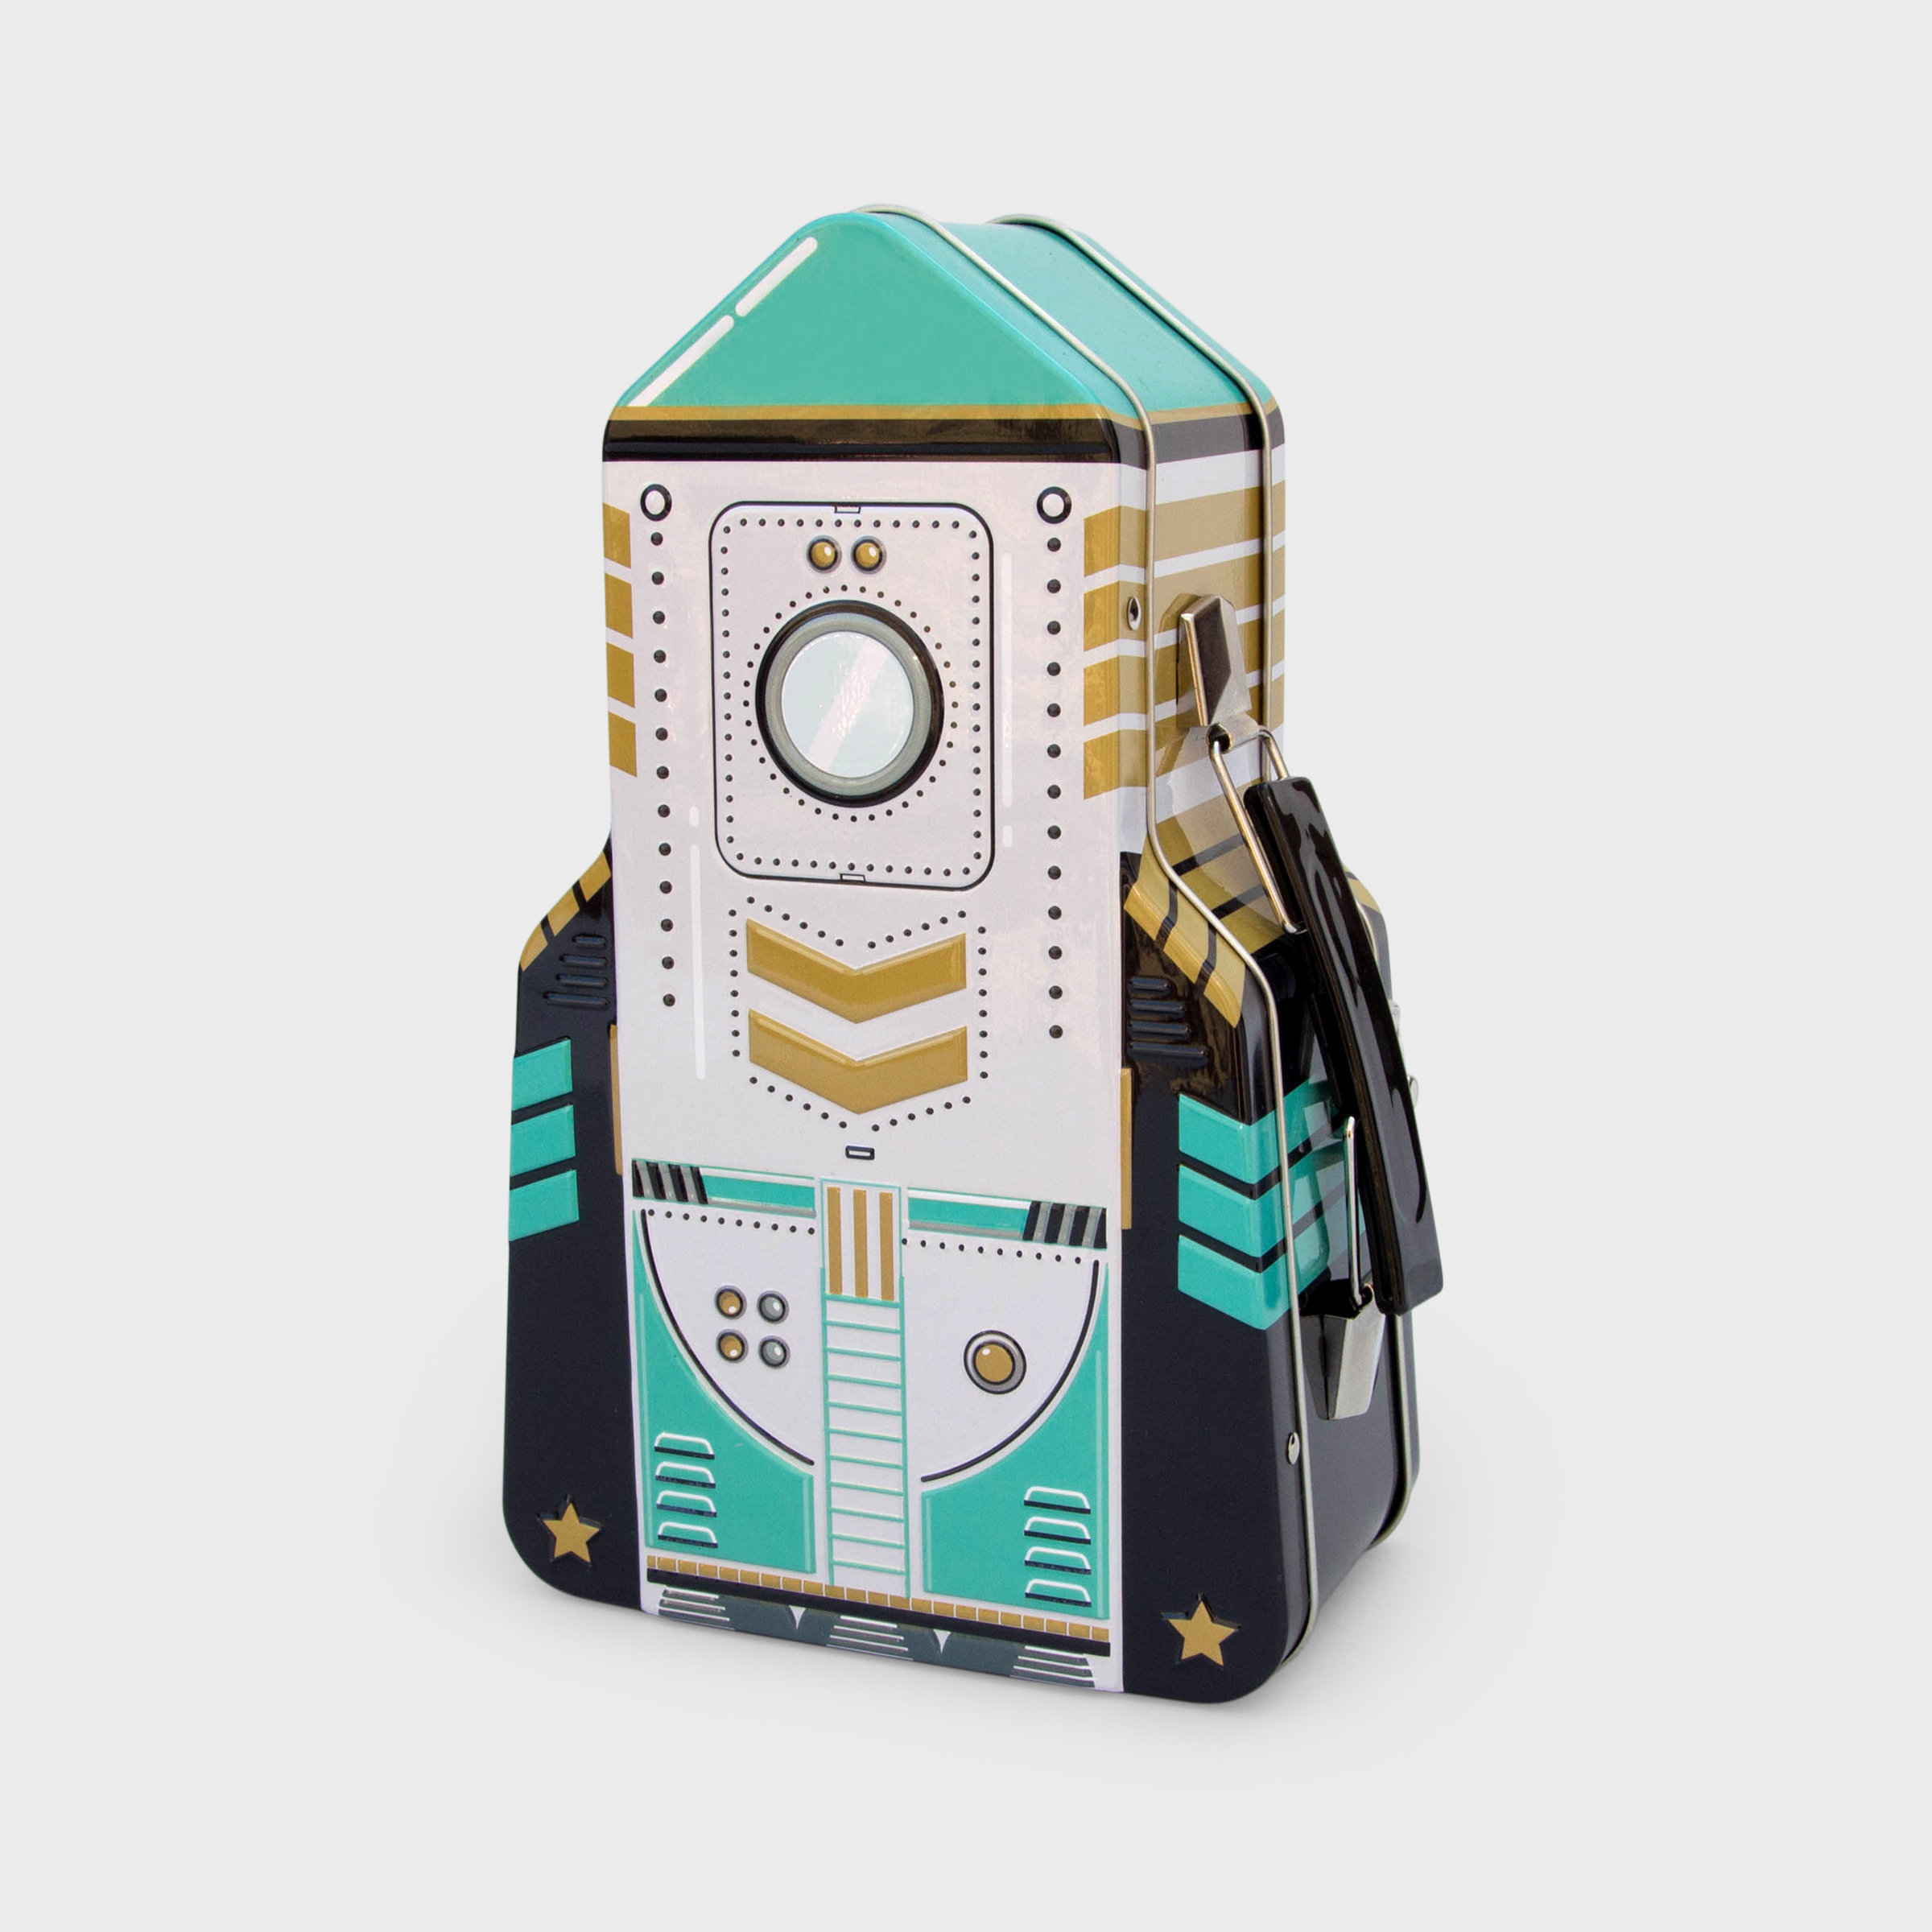 Tin rocket lunchbox in green gold and black